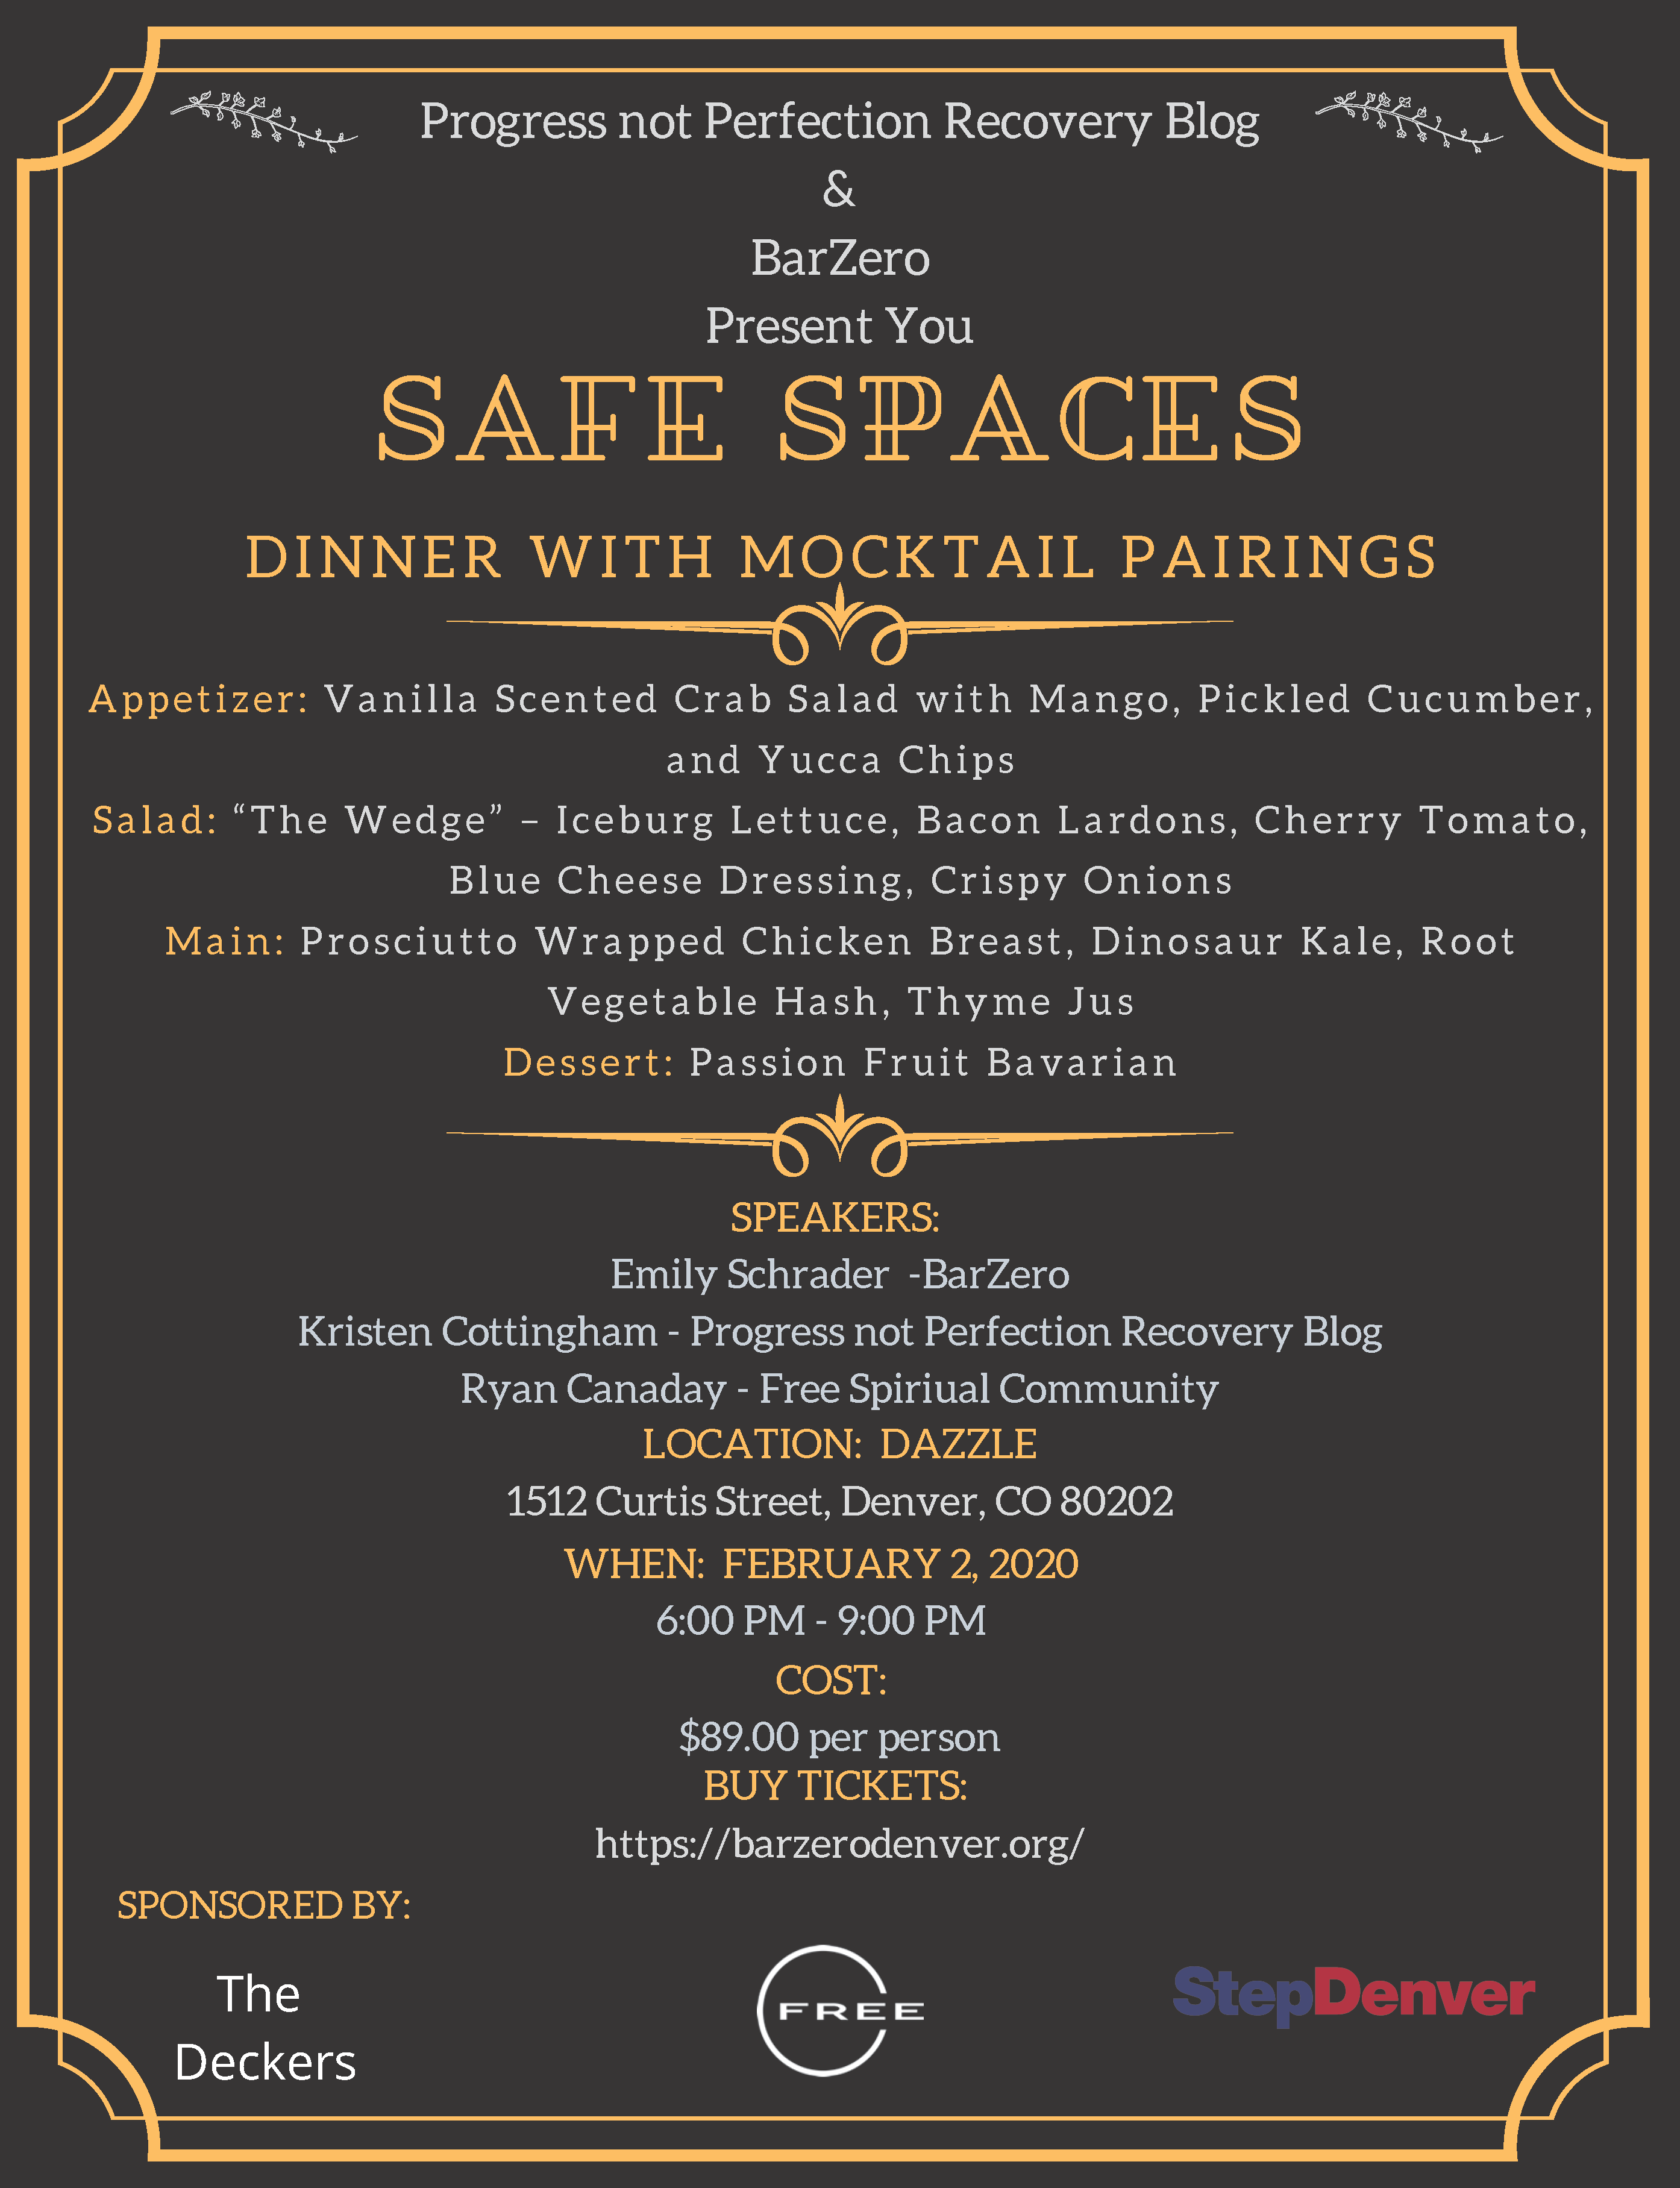 Safe Spaces Dinner with Mocktail Pairings